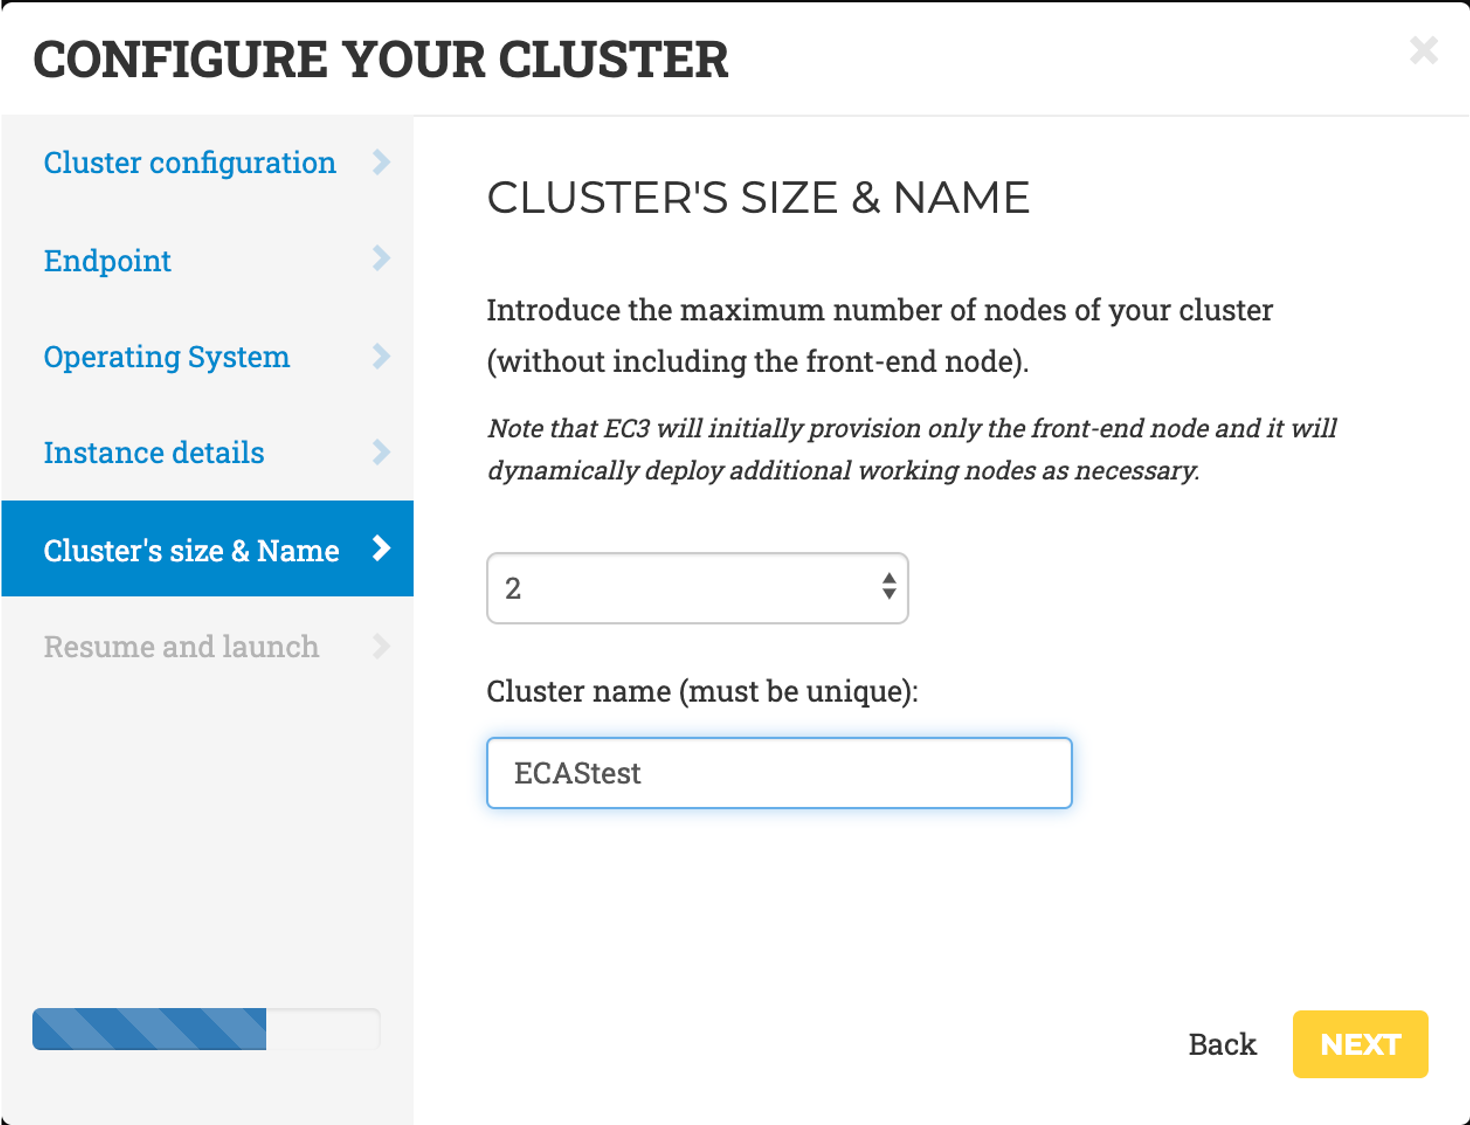 Cluster size and name